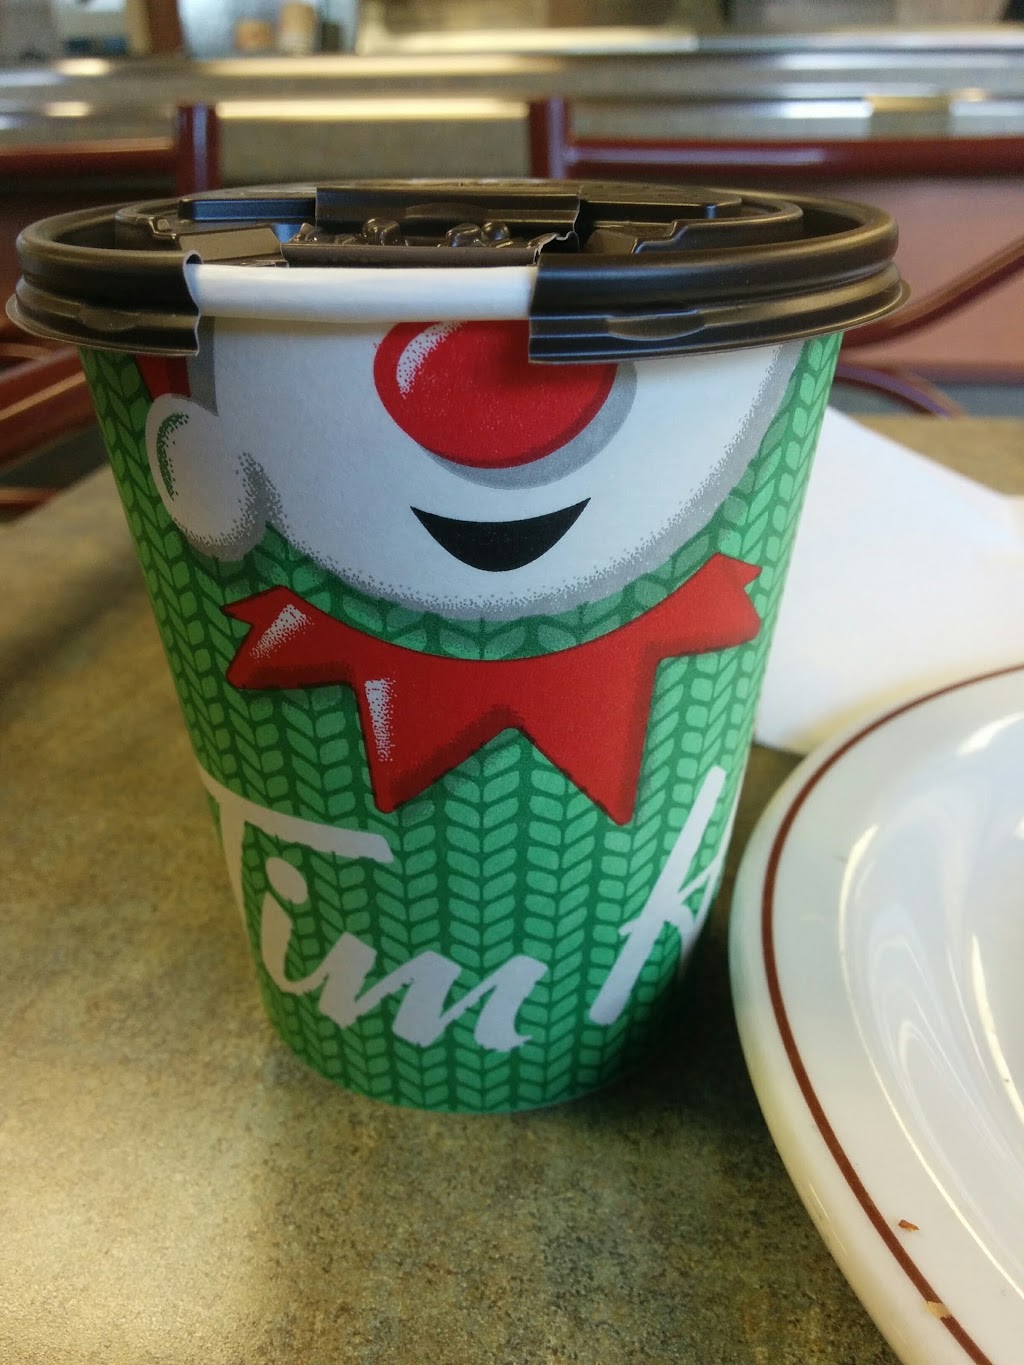 Tim Hortons | cafe | 116 Wyse Rd, Dartmouth, NS B3A 1M3, Canada | 9024631296 OR +1 902-463-1296